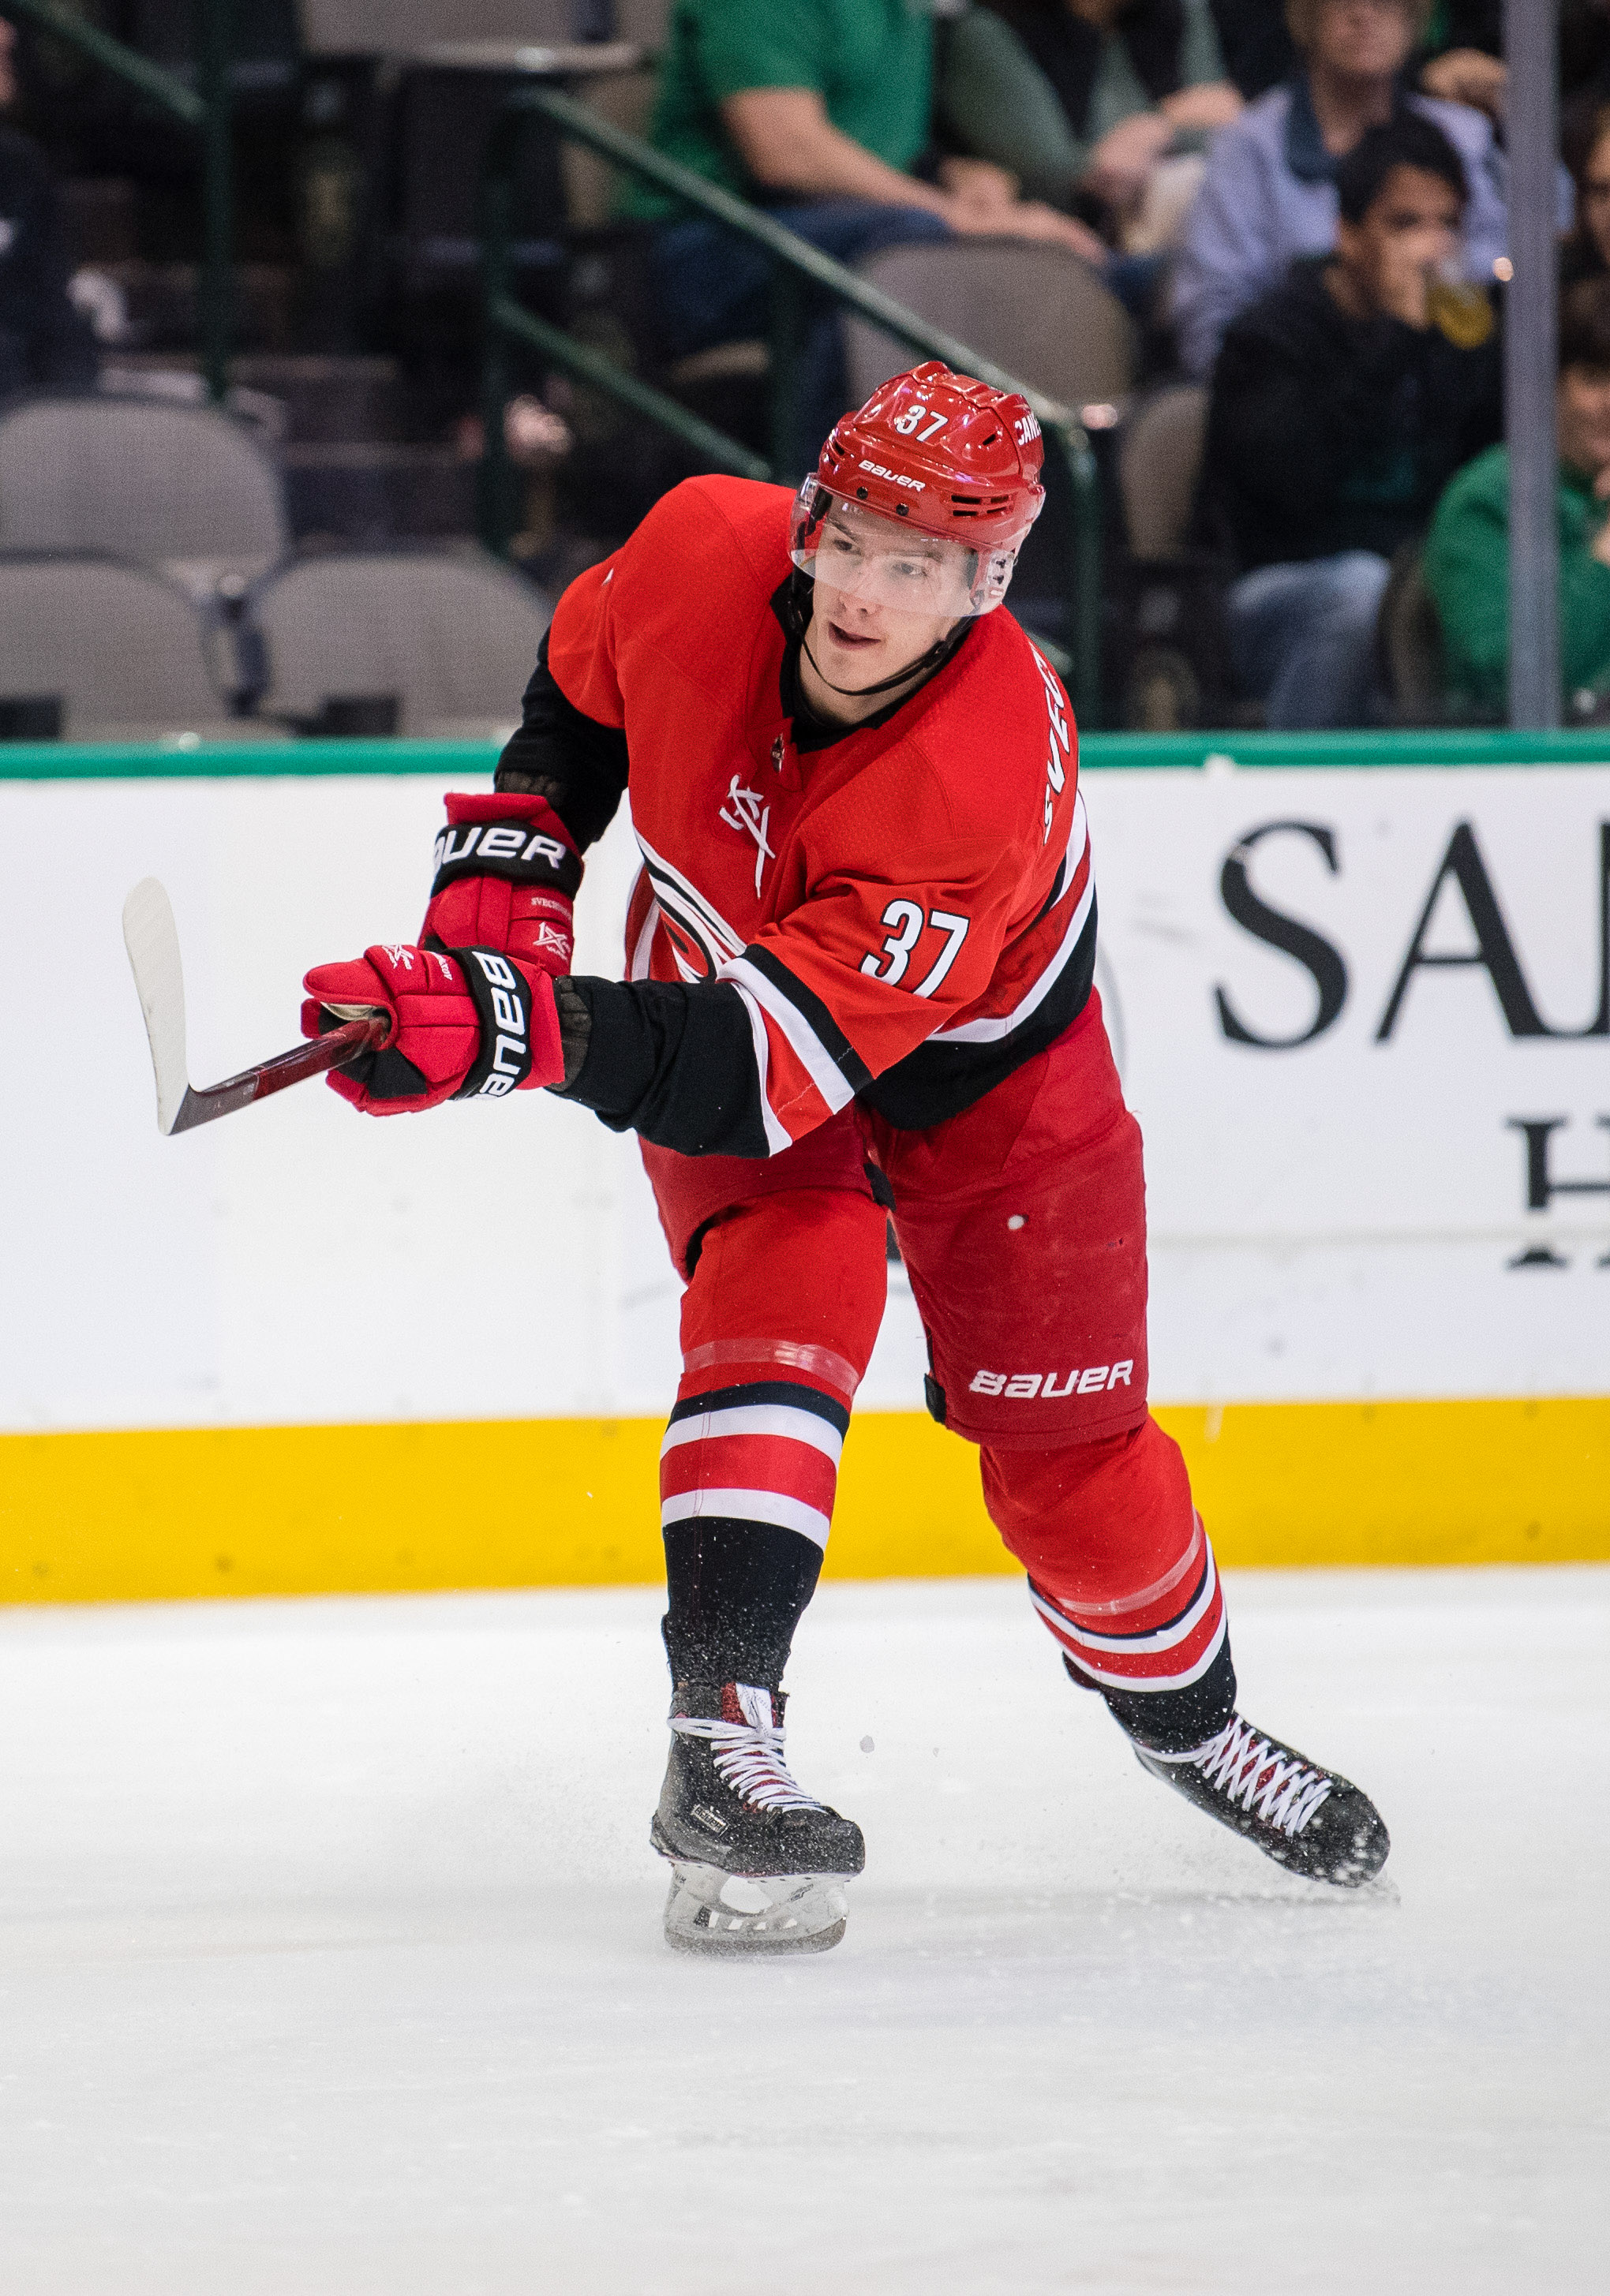 Hurricanes should sign Andrei Svechnikov to contract extension as soon as  possible - NBC Sports